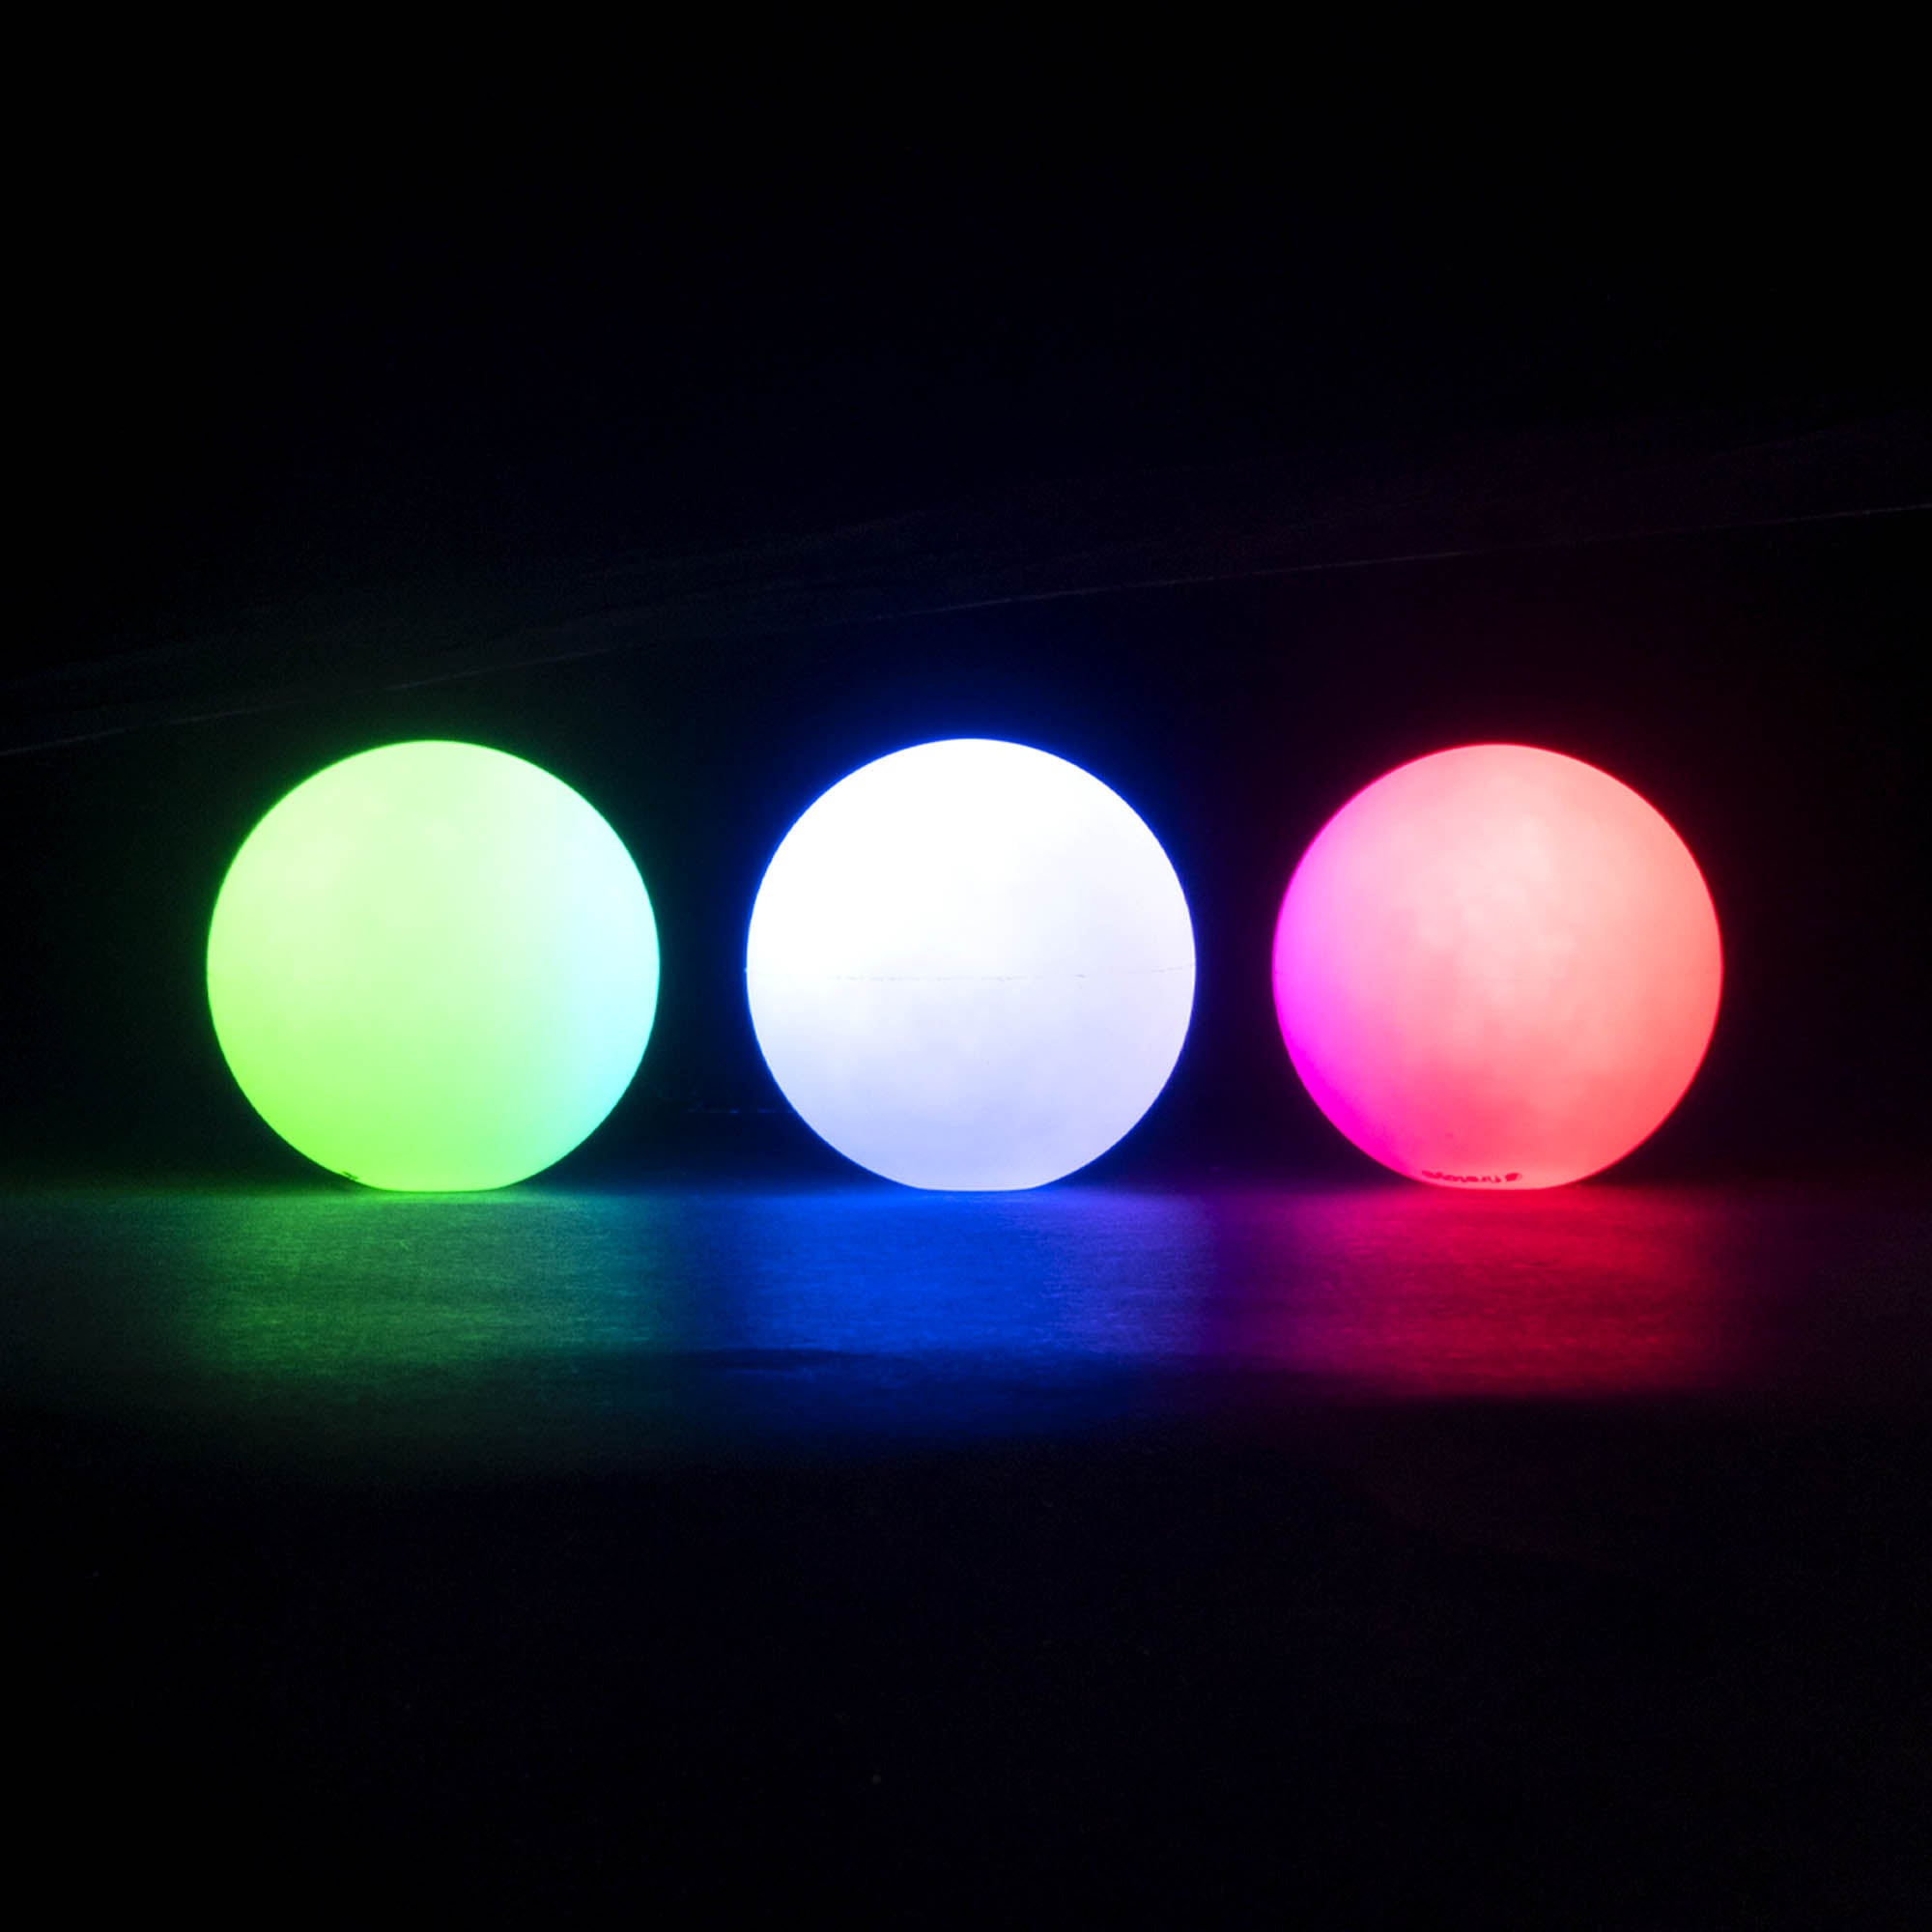 3 balls in a line glowing different colours